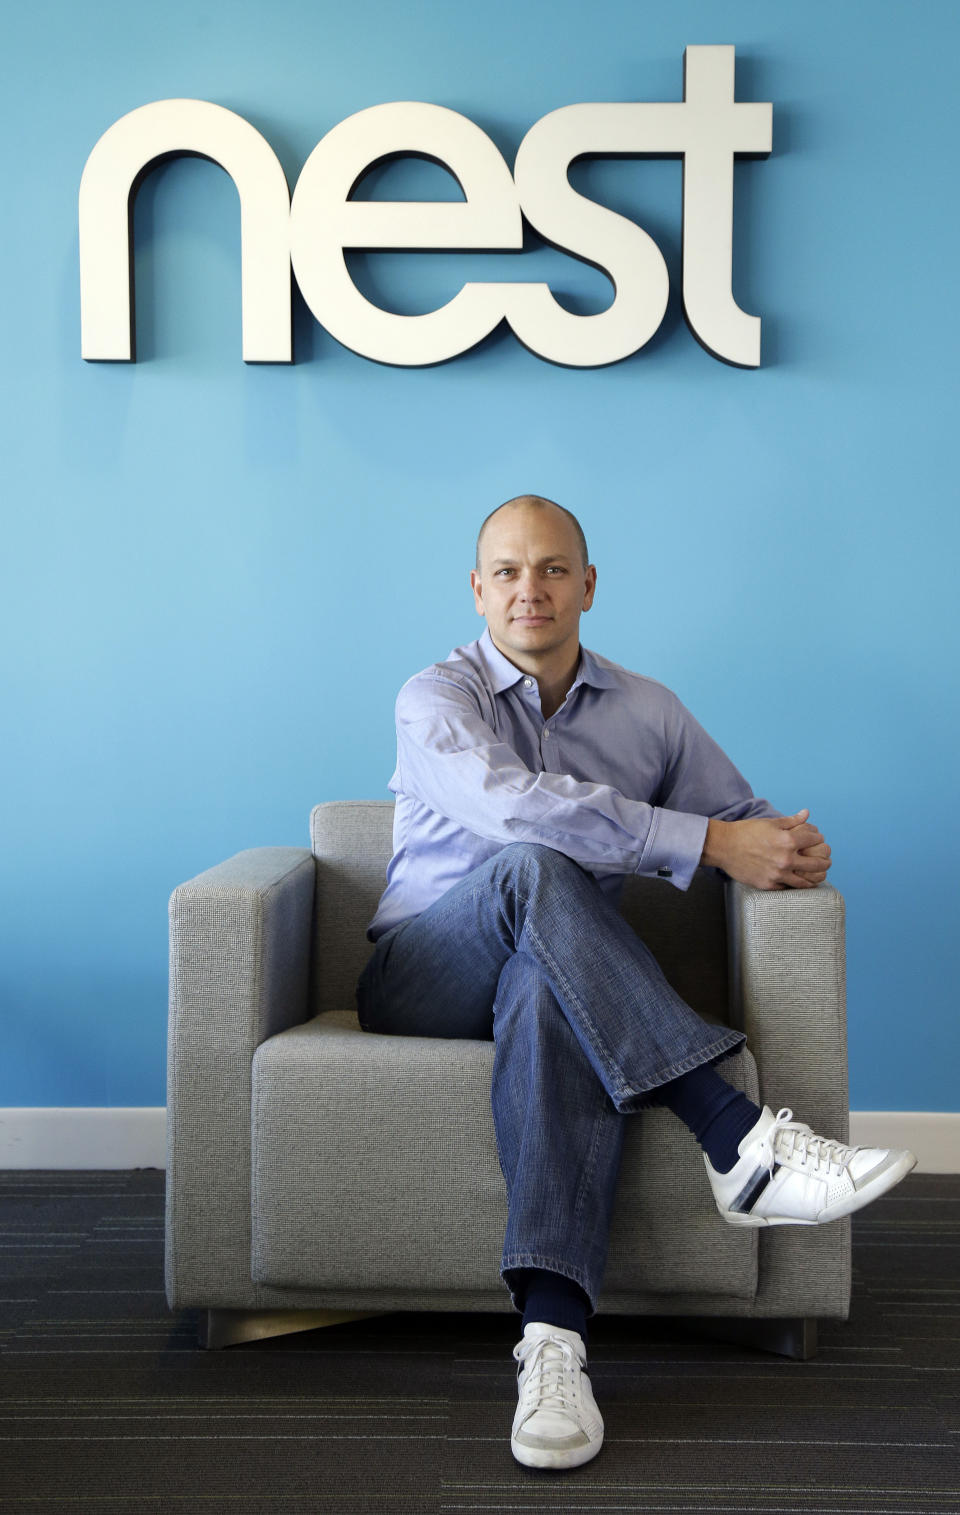 In this Tuesday, Oct. 1, 2013, photo, Tony Fadell, Founder and CEO of Nest, poses for a portrait in the company's offices in Palo Alto, Calif. (AP Photo/Marcio Jose Sanchez)